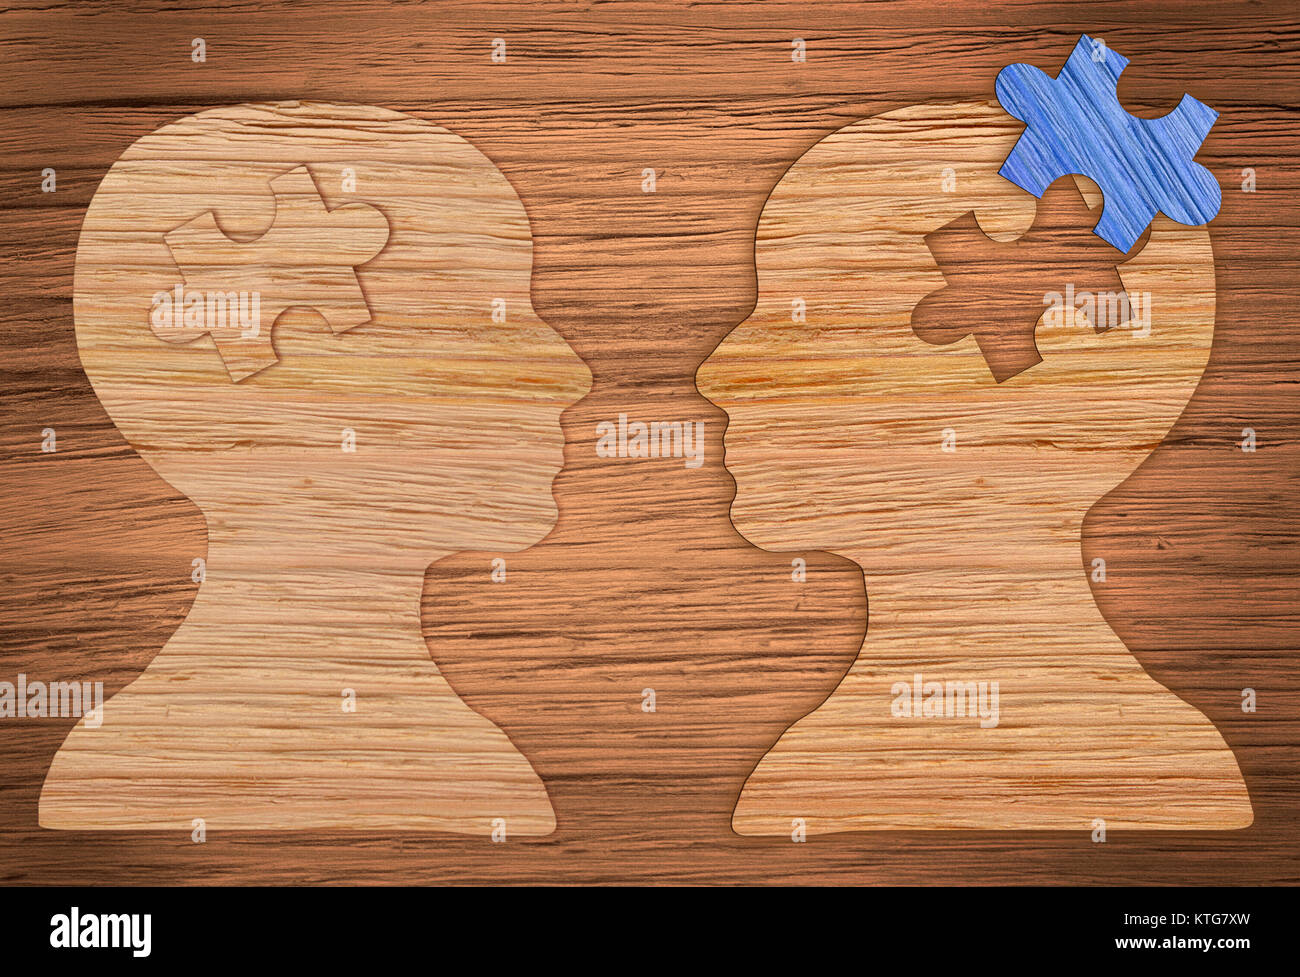 Puzzle head brain concept. Human head profile made from brown paper with a jigsaw piece cut out. Stock Photo